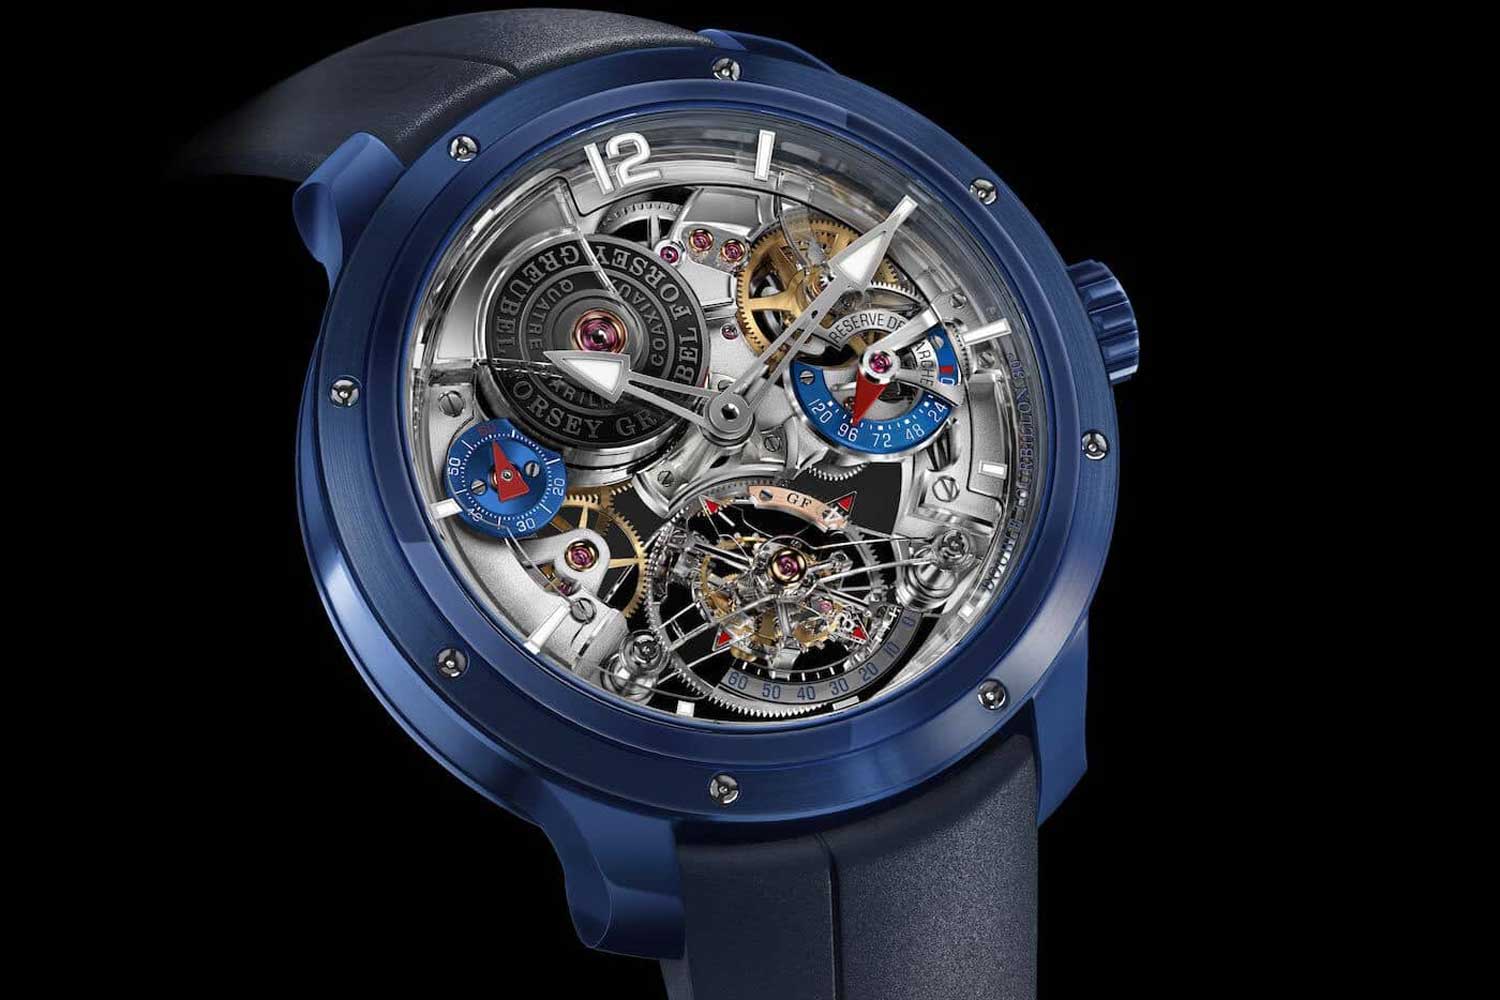 The GMT Quadruple Tourbillon is based on Greubel Forsey’s First Invention, the Double Tourbillon 30. Seen here is the Double Tourbillon 30 Technique Ceramic introduced in 2019.